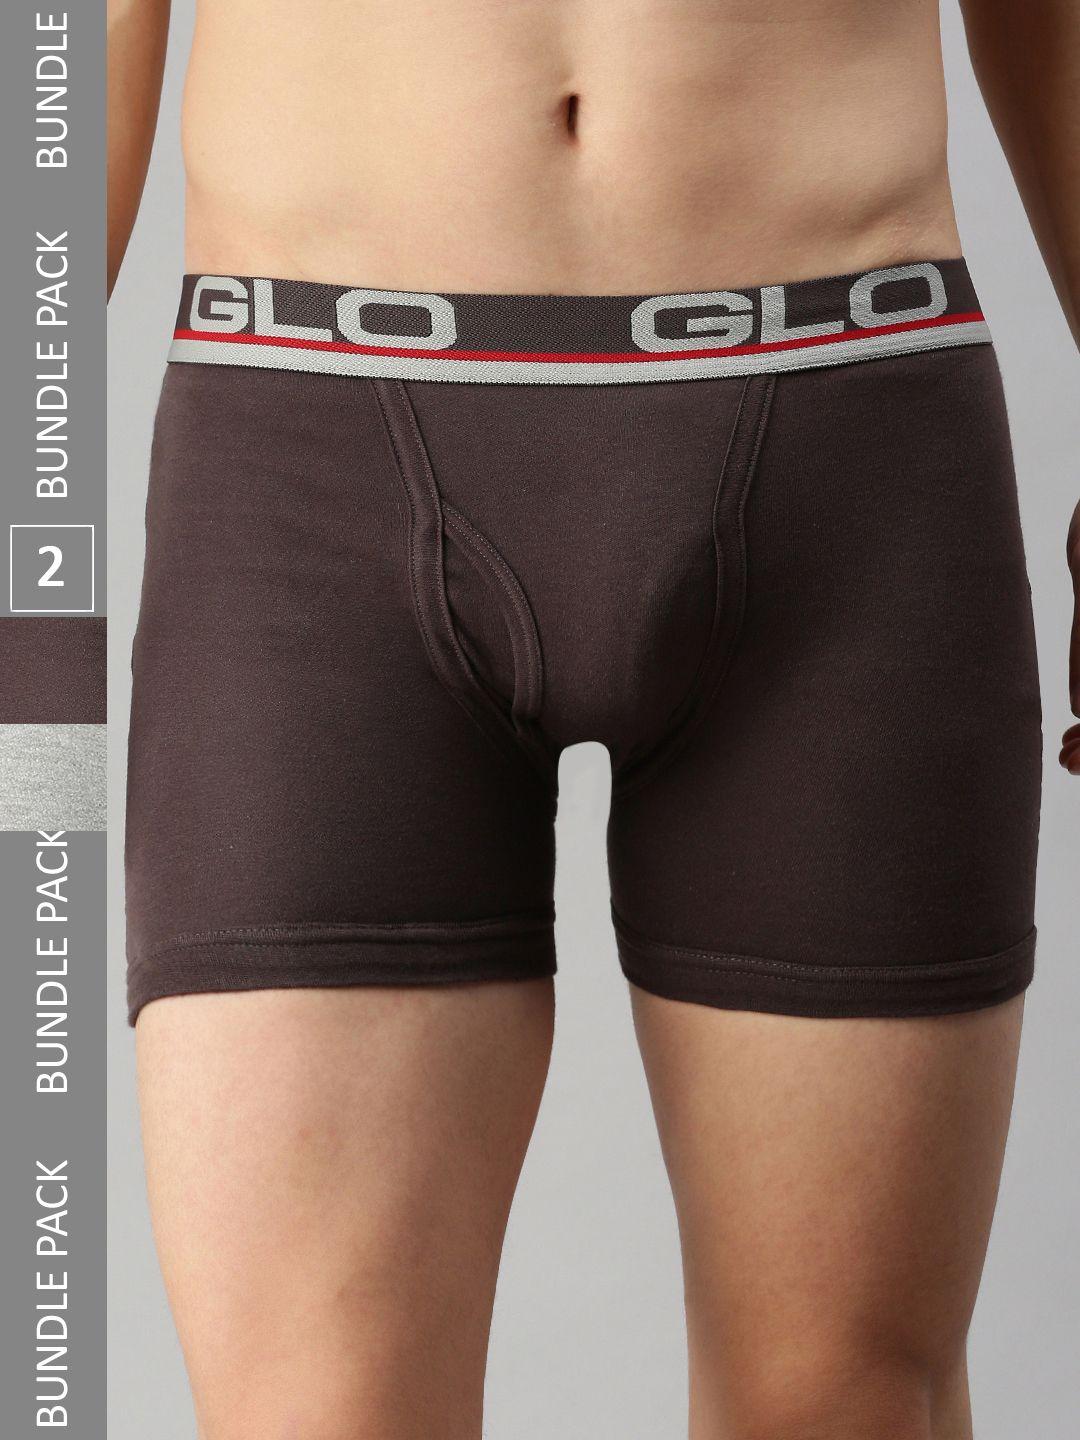 lux cozi pack of 2 outer elastic mid-rise trunks- cozi_glo_intlock_cof_gm_2pc